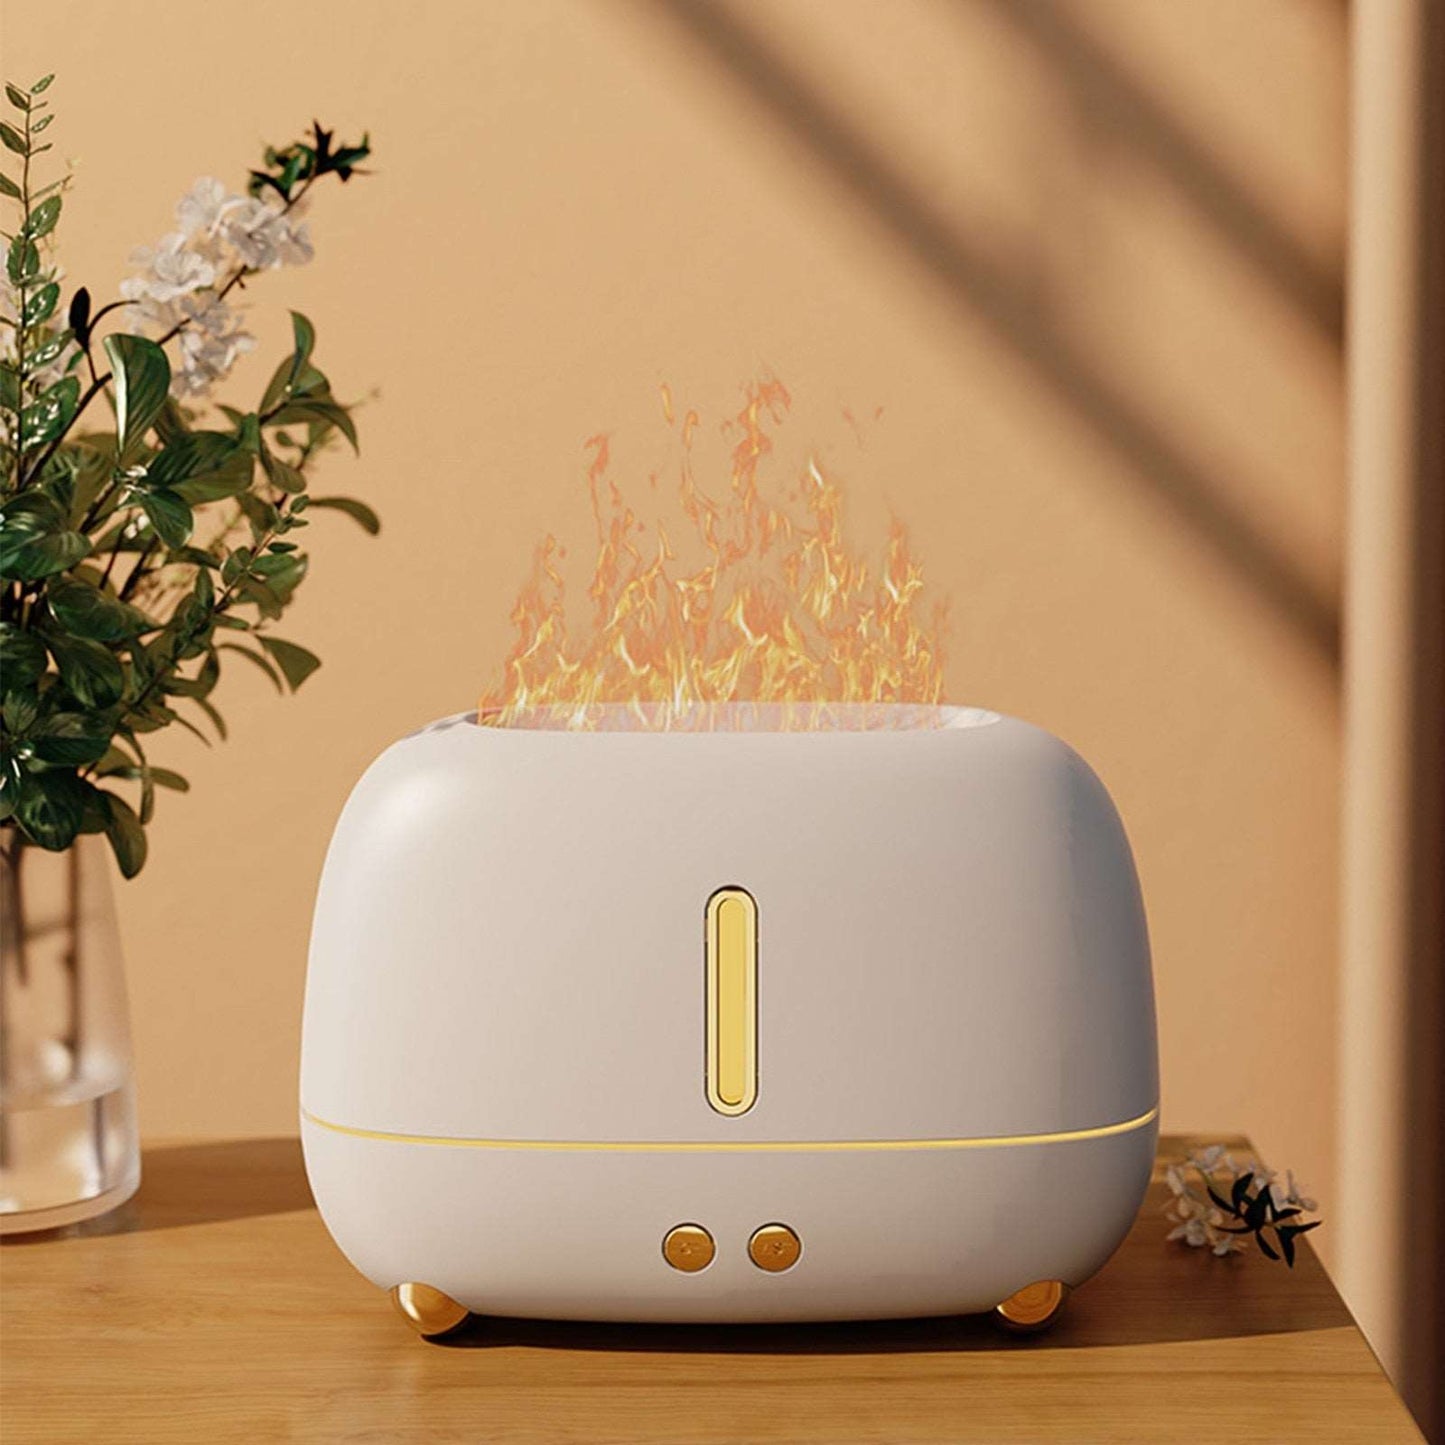 Home Finesse Aromatherapy Flame Humidifier - 3 Color Options